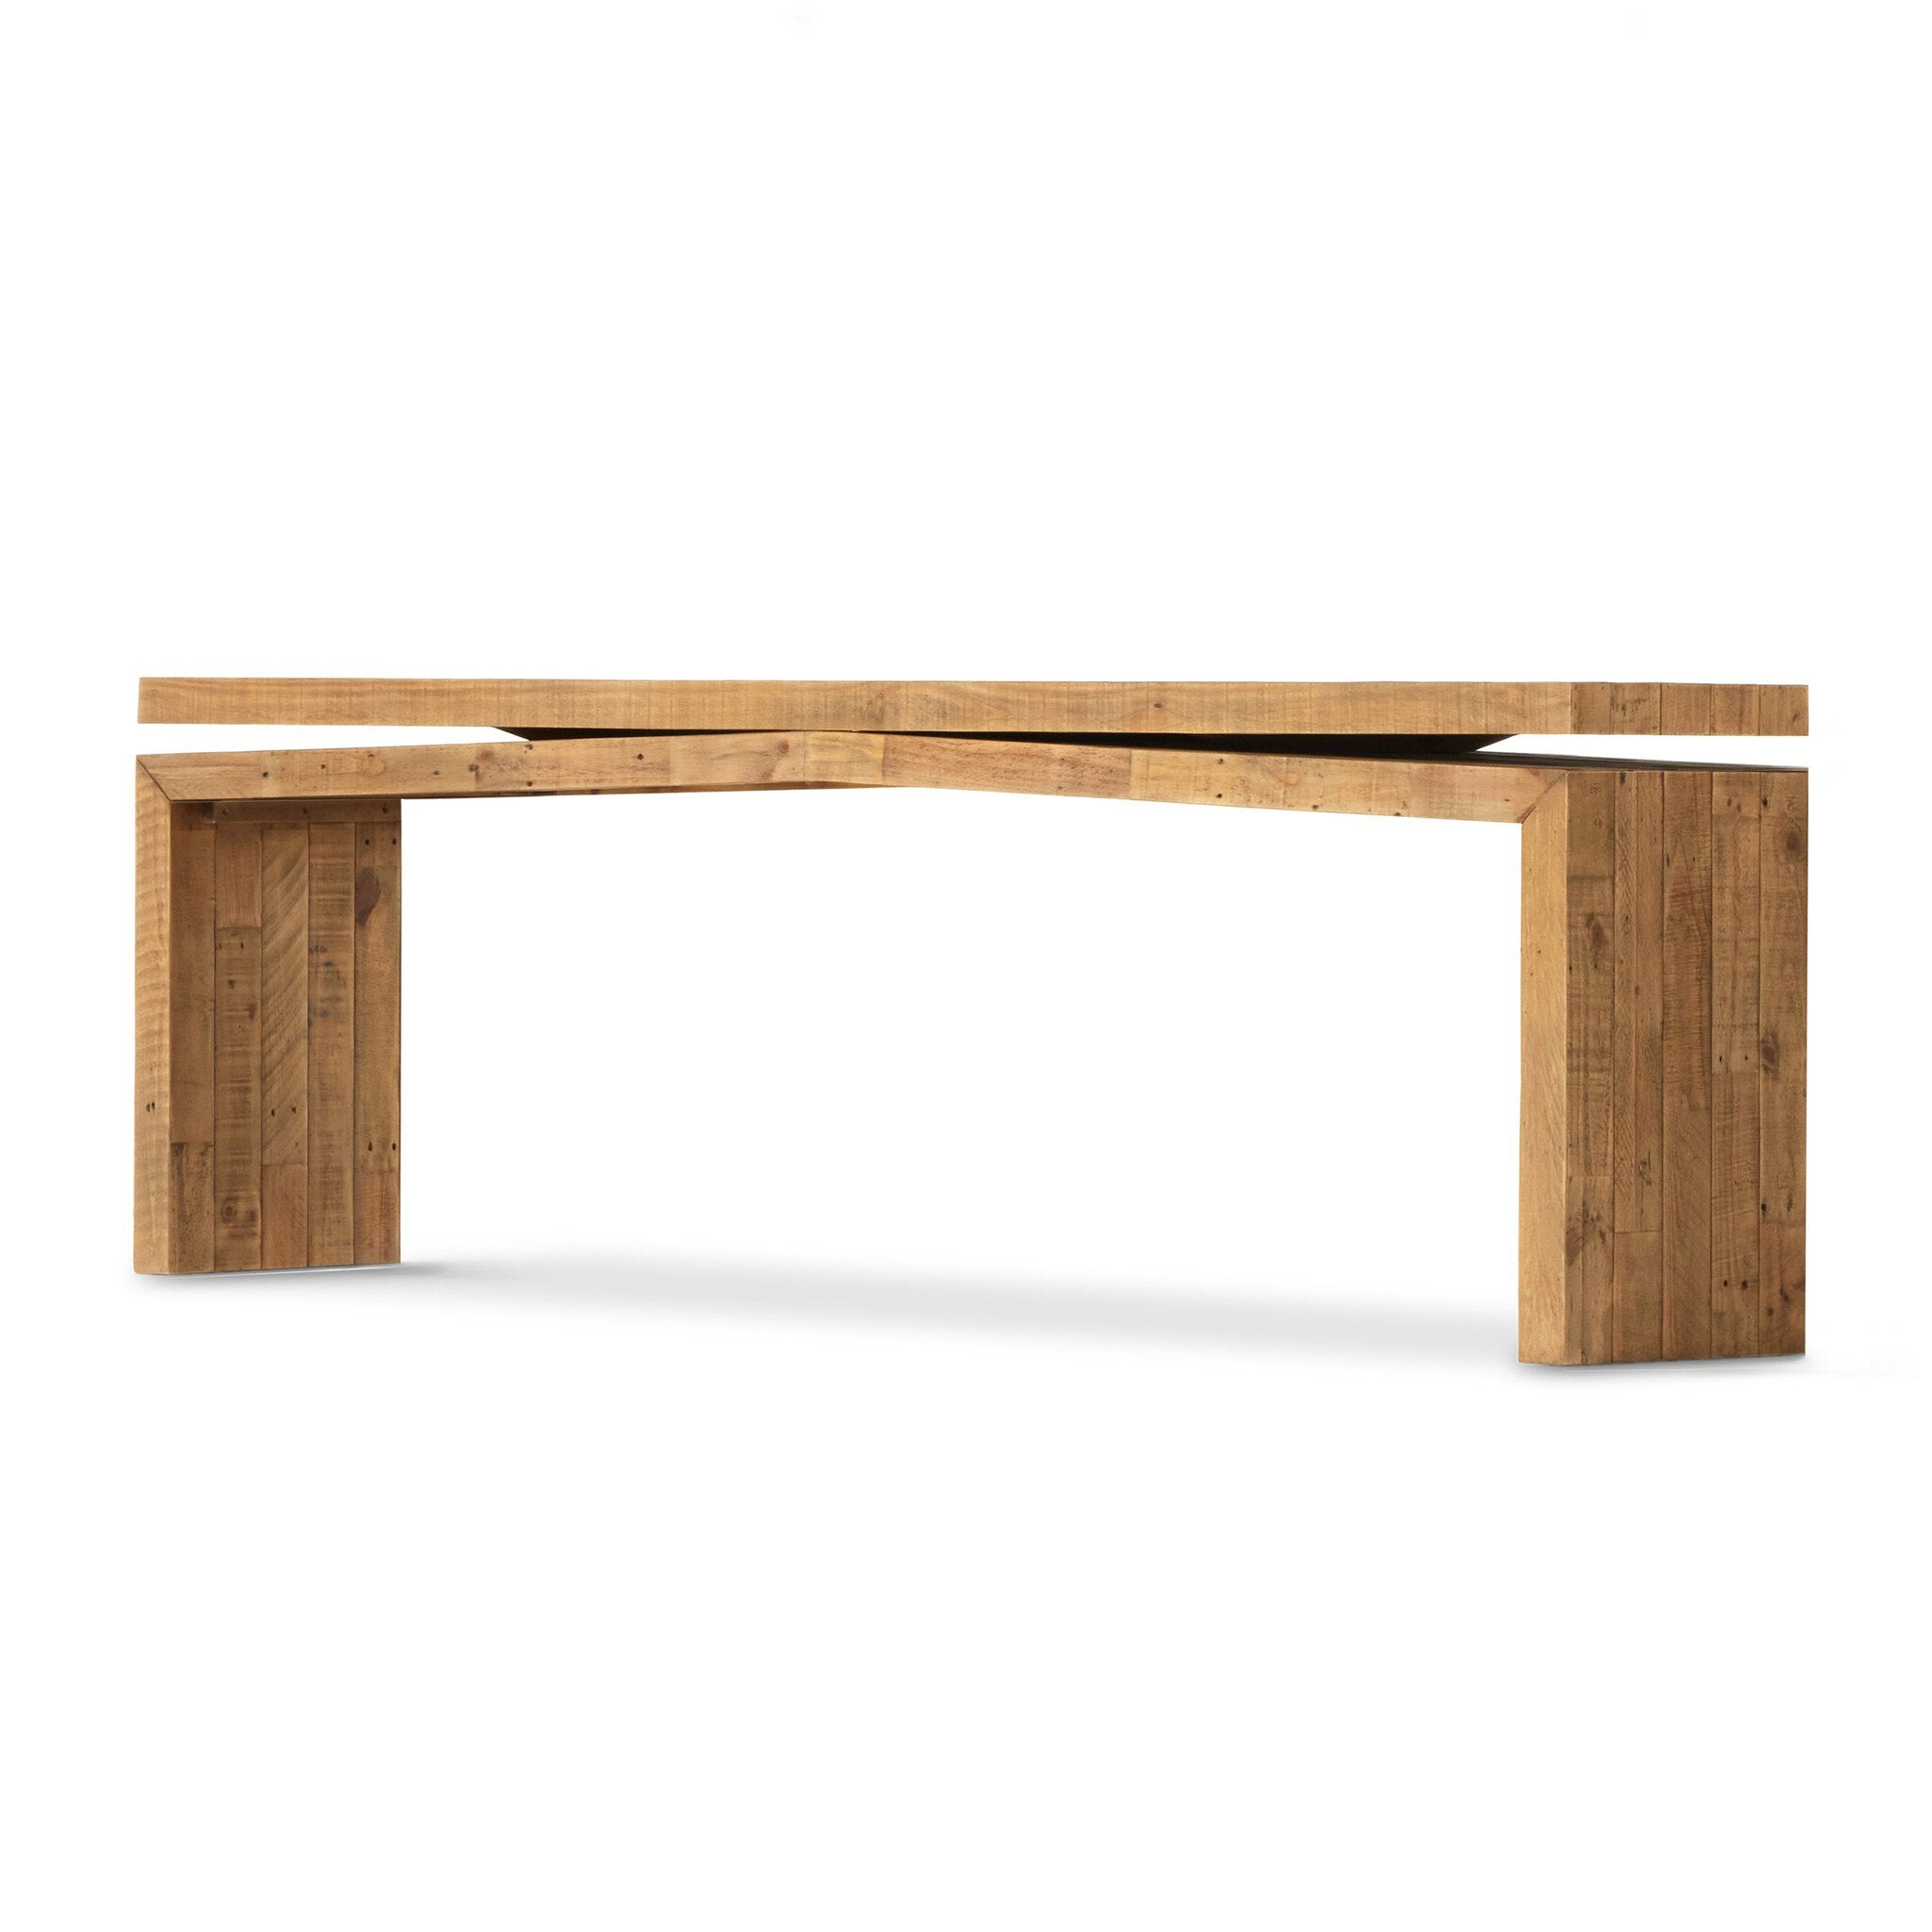 Matthes Large Console Table - Sierra Rustic Natural